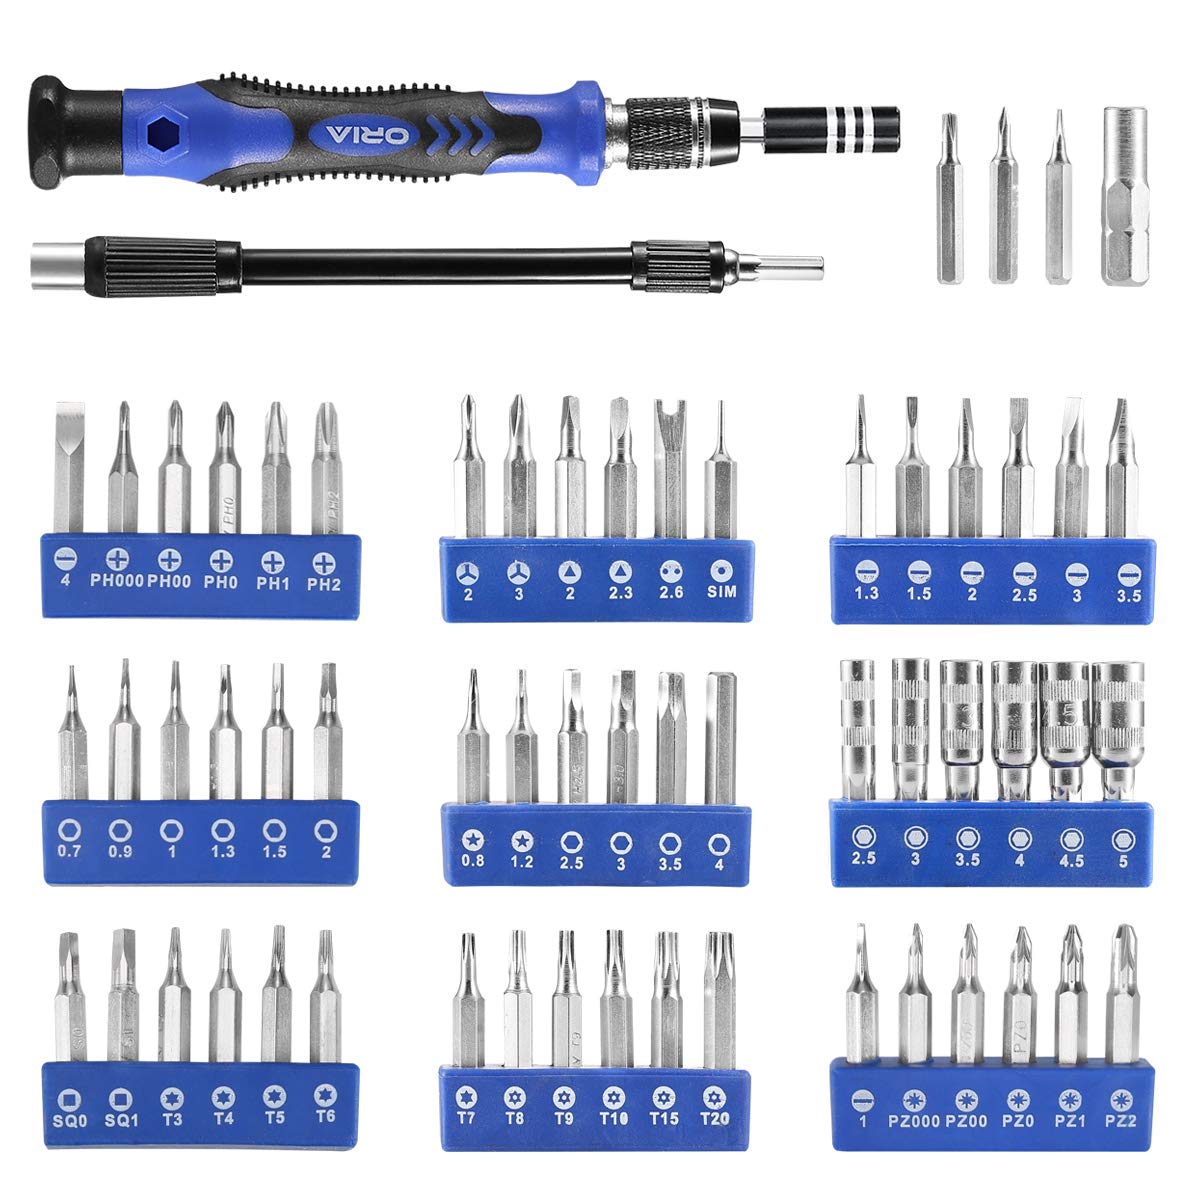 ORIA Precision Screwdriver Kit, 86 in 1 with 57 Bits Repair Tool Kit, Portable Bag for Cellphone, Game Console, Tablet and Other Devices, Blue